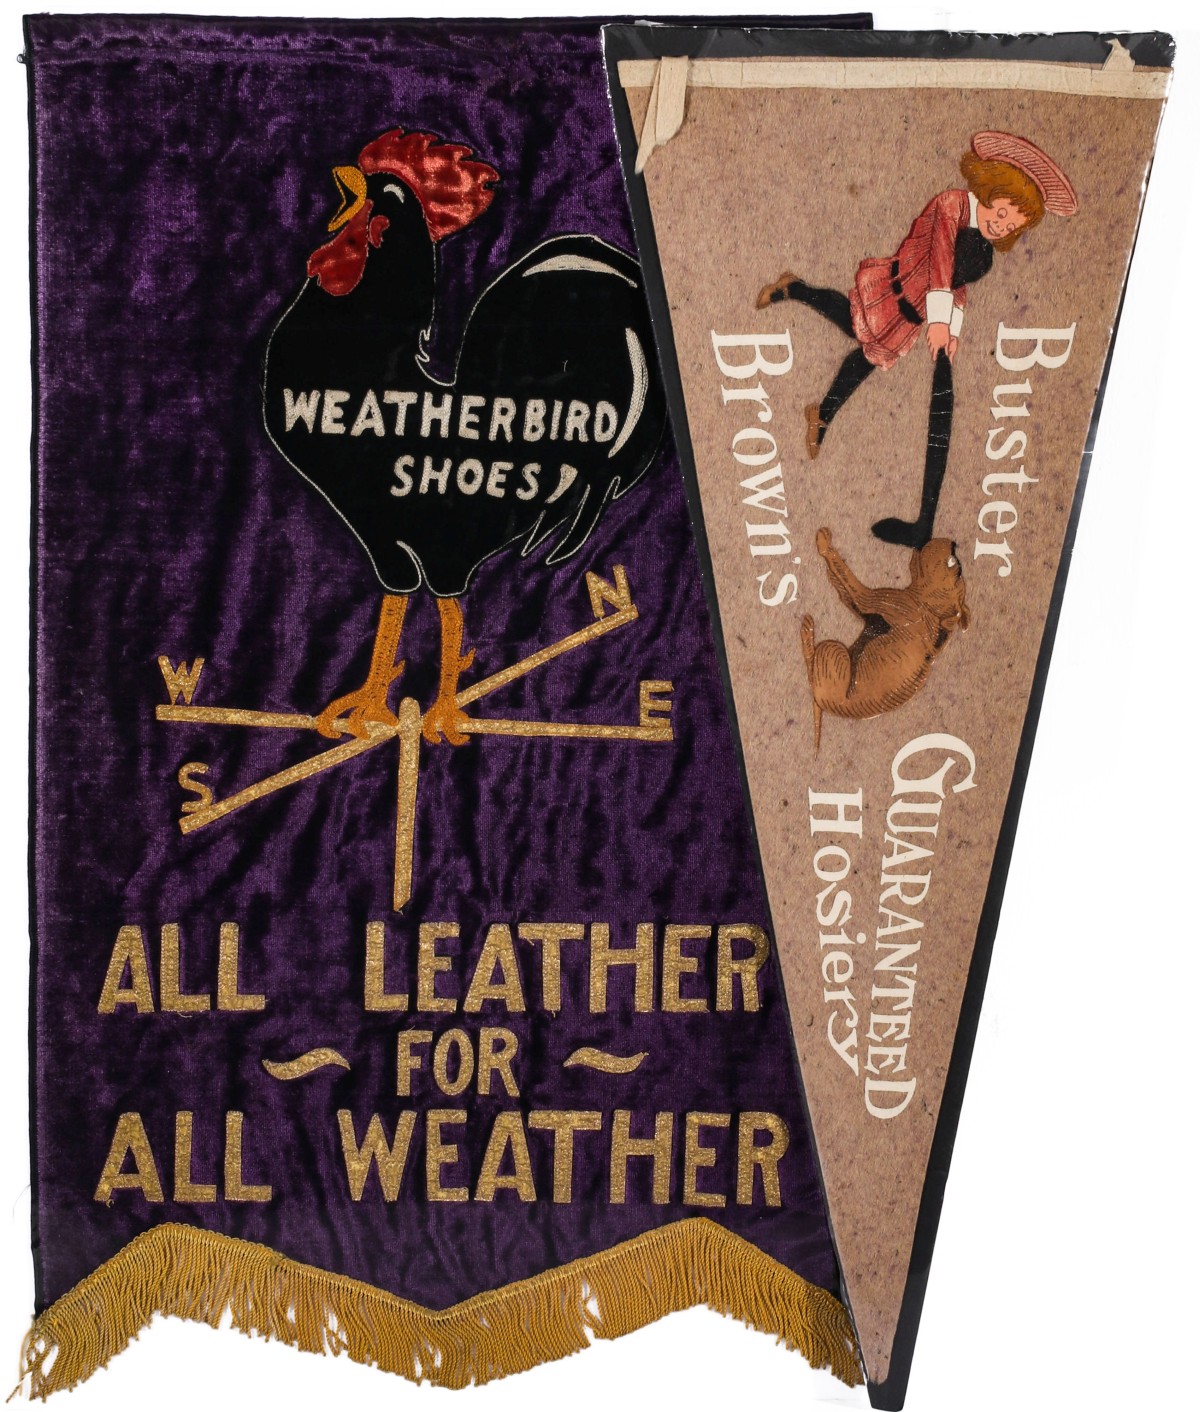 BUSTER BROWN AND WEATHERBIRD SHOES FELT PENNANTS